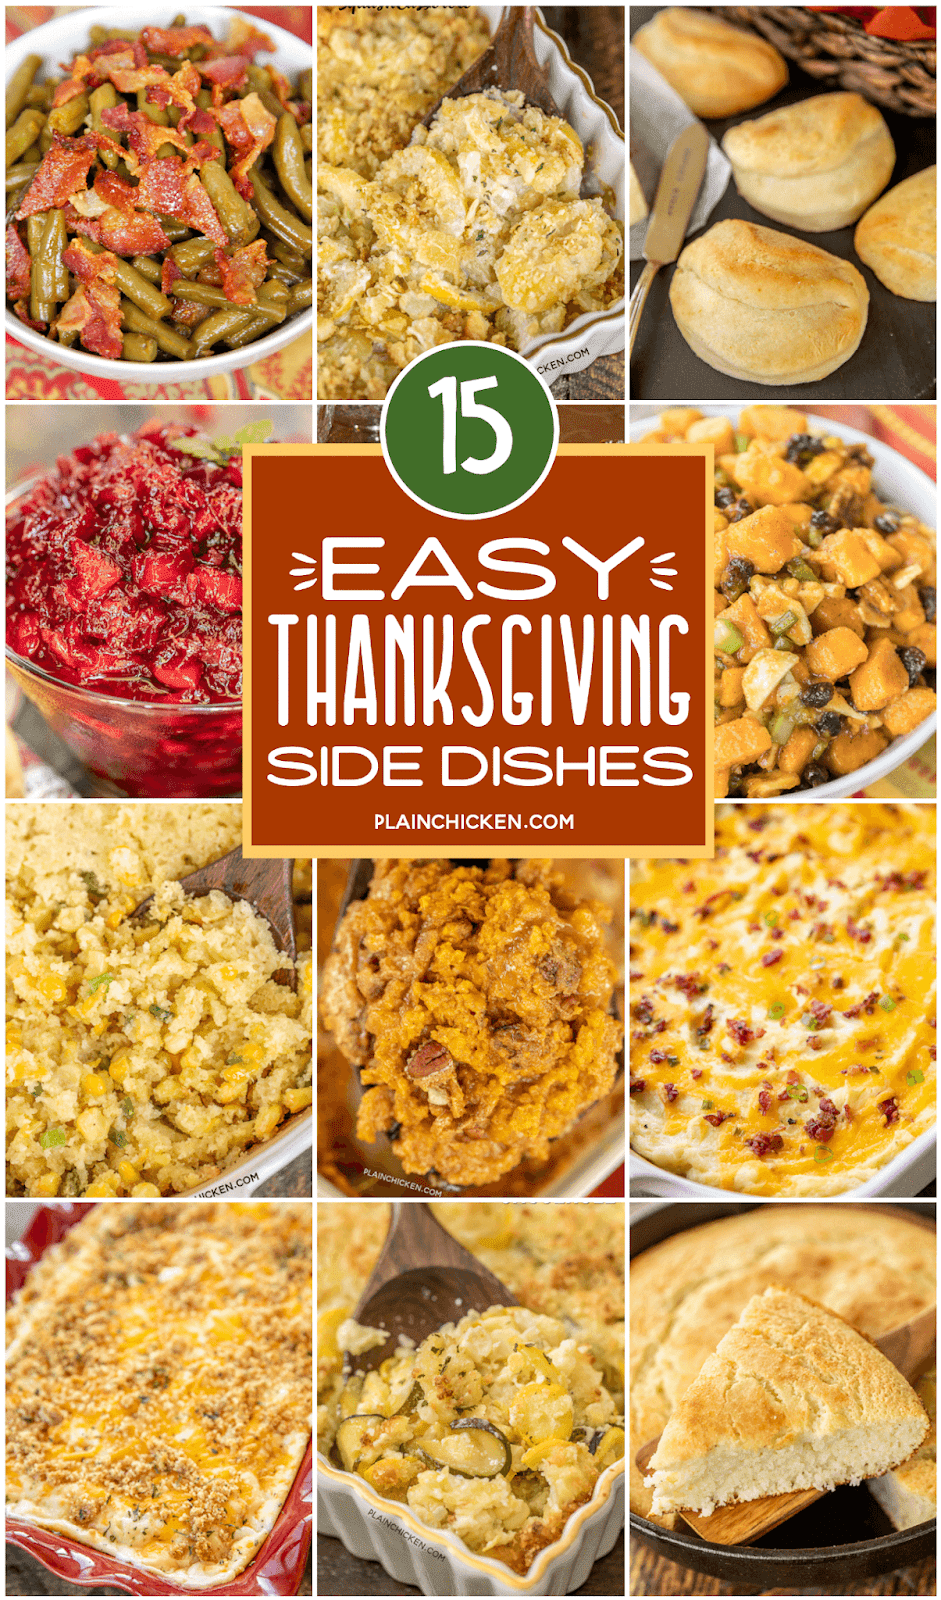 Easy Thanksgiving Side Dishes Plain Chicken,Bathroom Cabinet Colors 2019